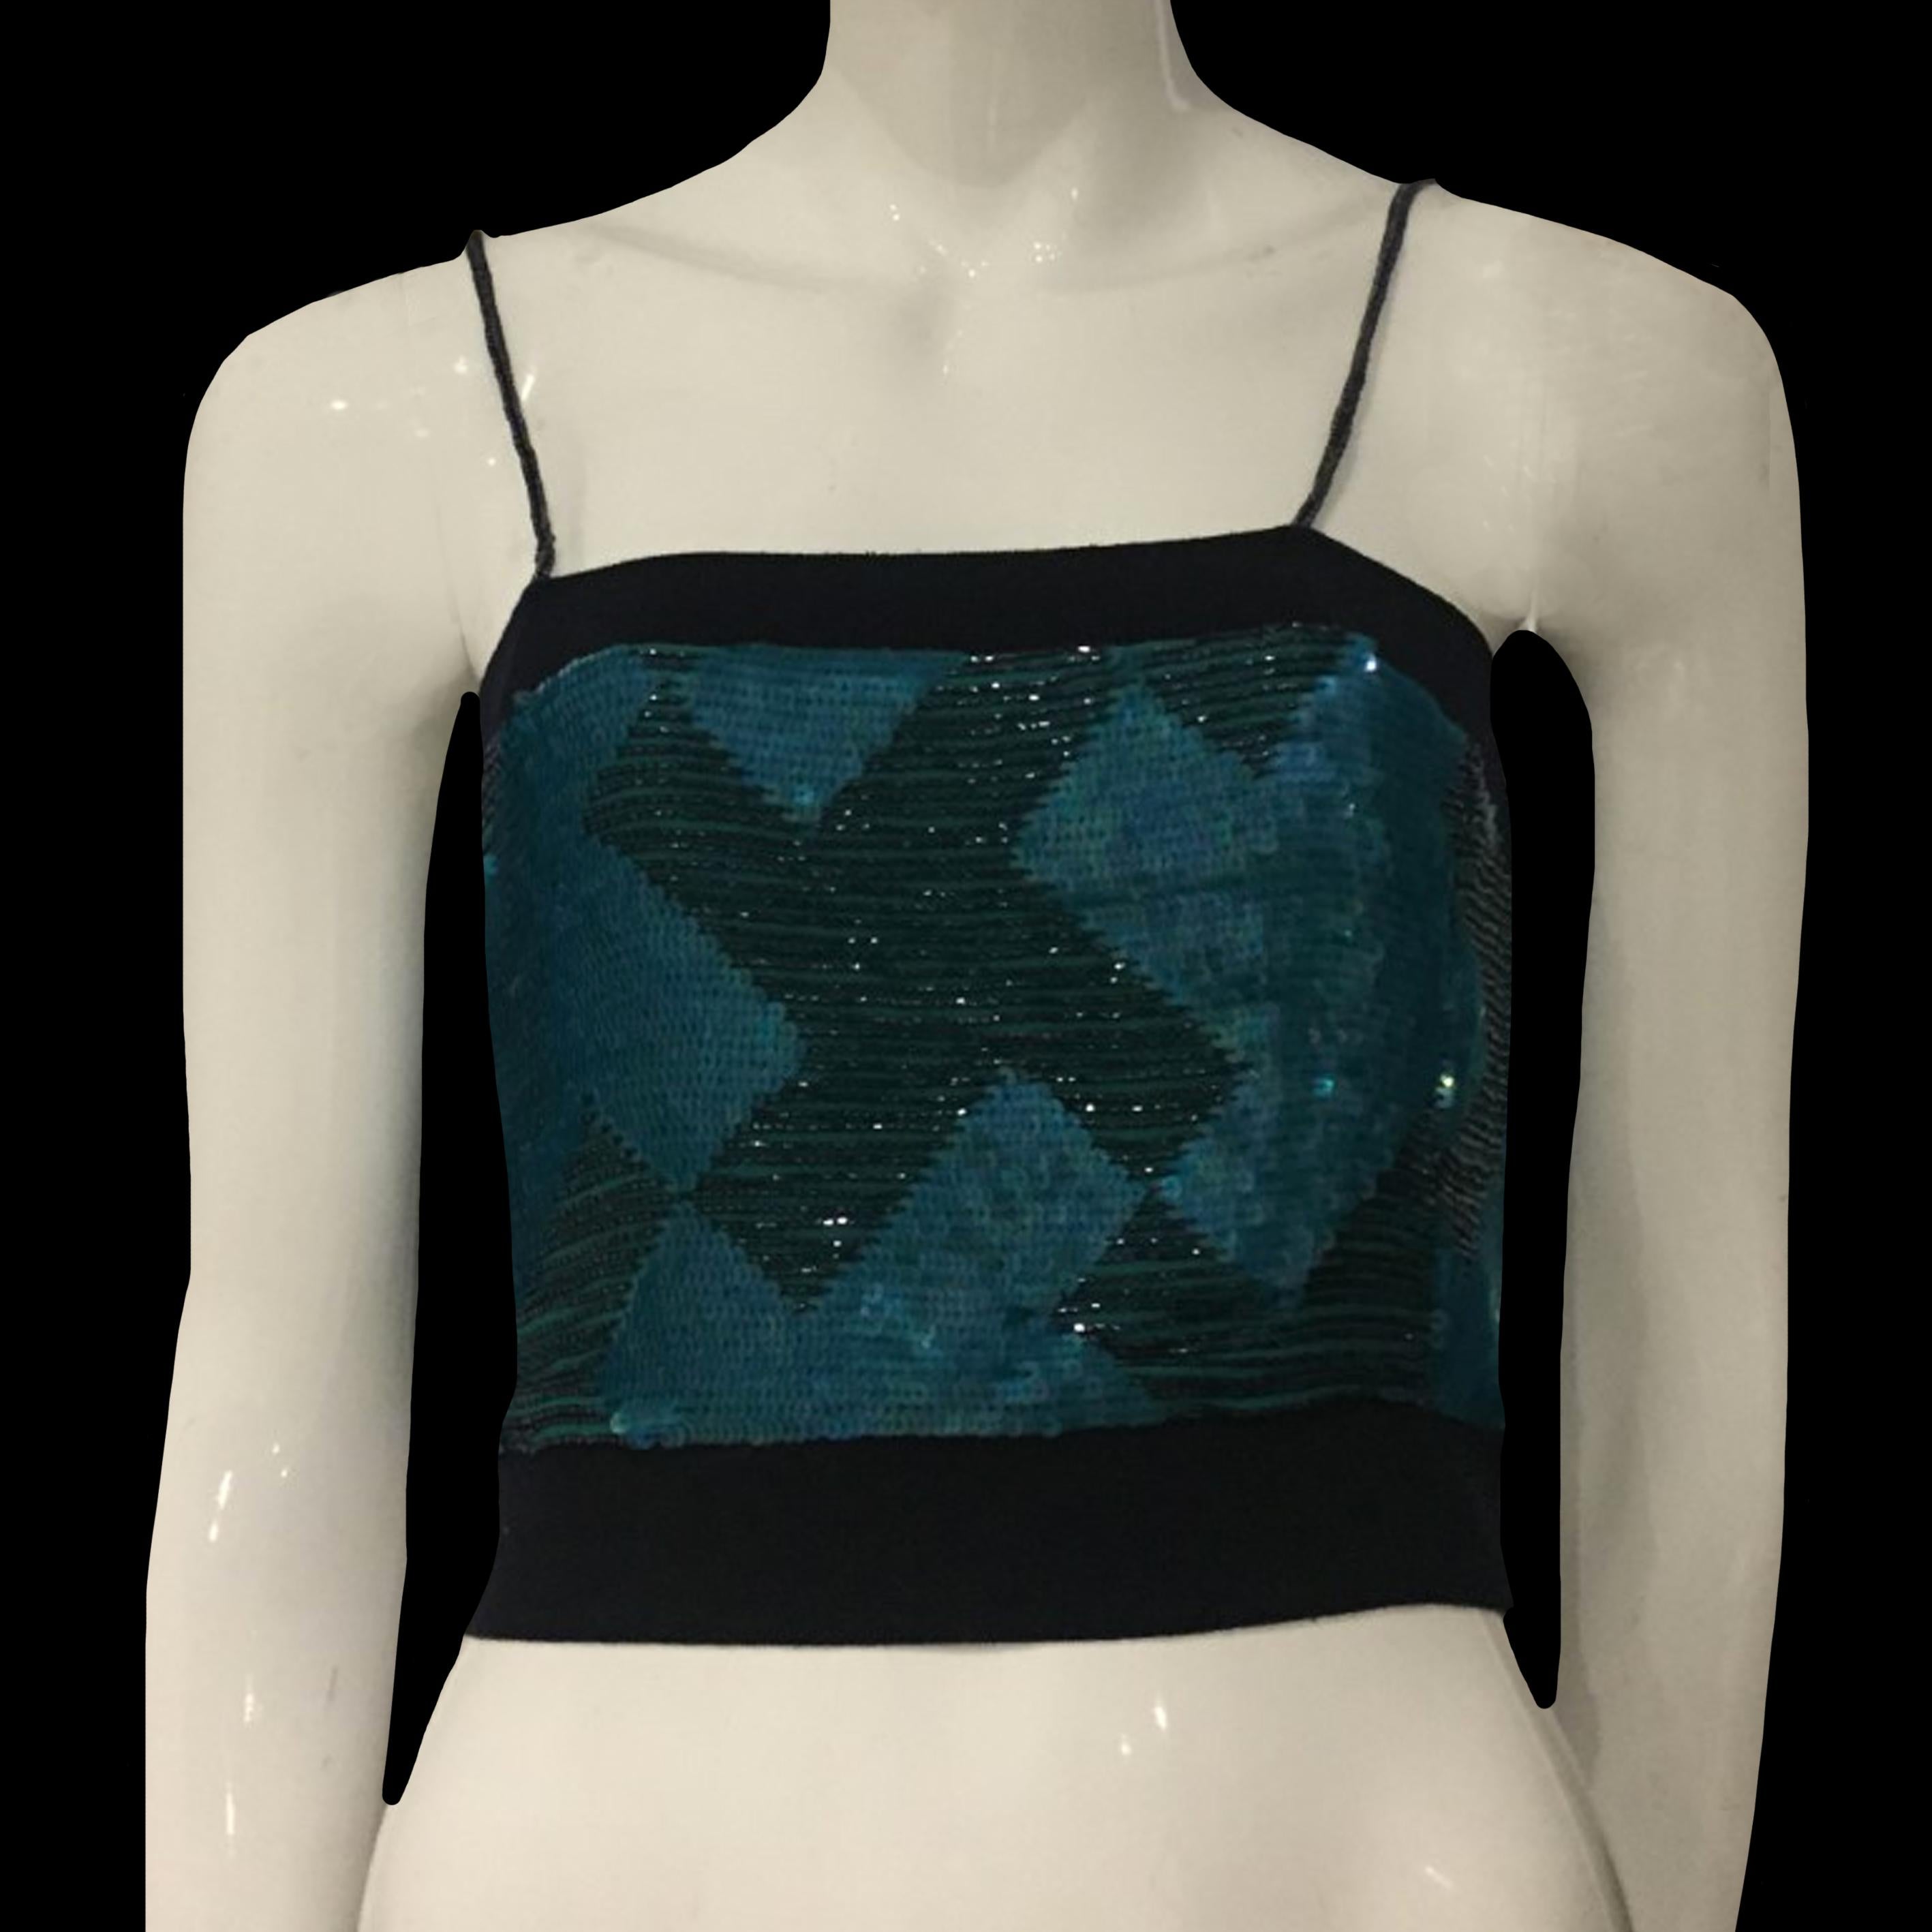 EMPORIO ARMANI FW2002 Turquoise sequins silk top with black pearls

Tag EMPORIO ARMANI

Size S
Chest 32cm
Length 40cm

Zip on the side

Perfect condition

Shipping worldwide with tracking number